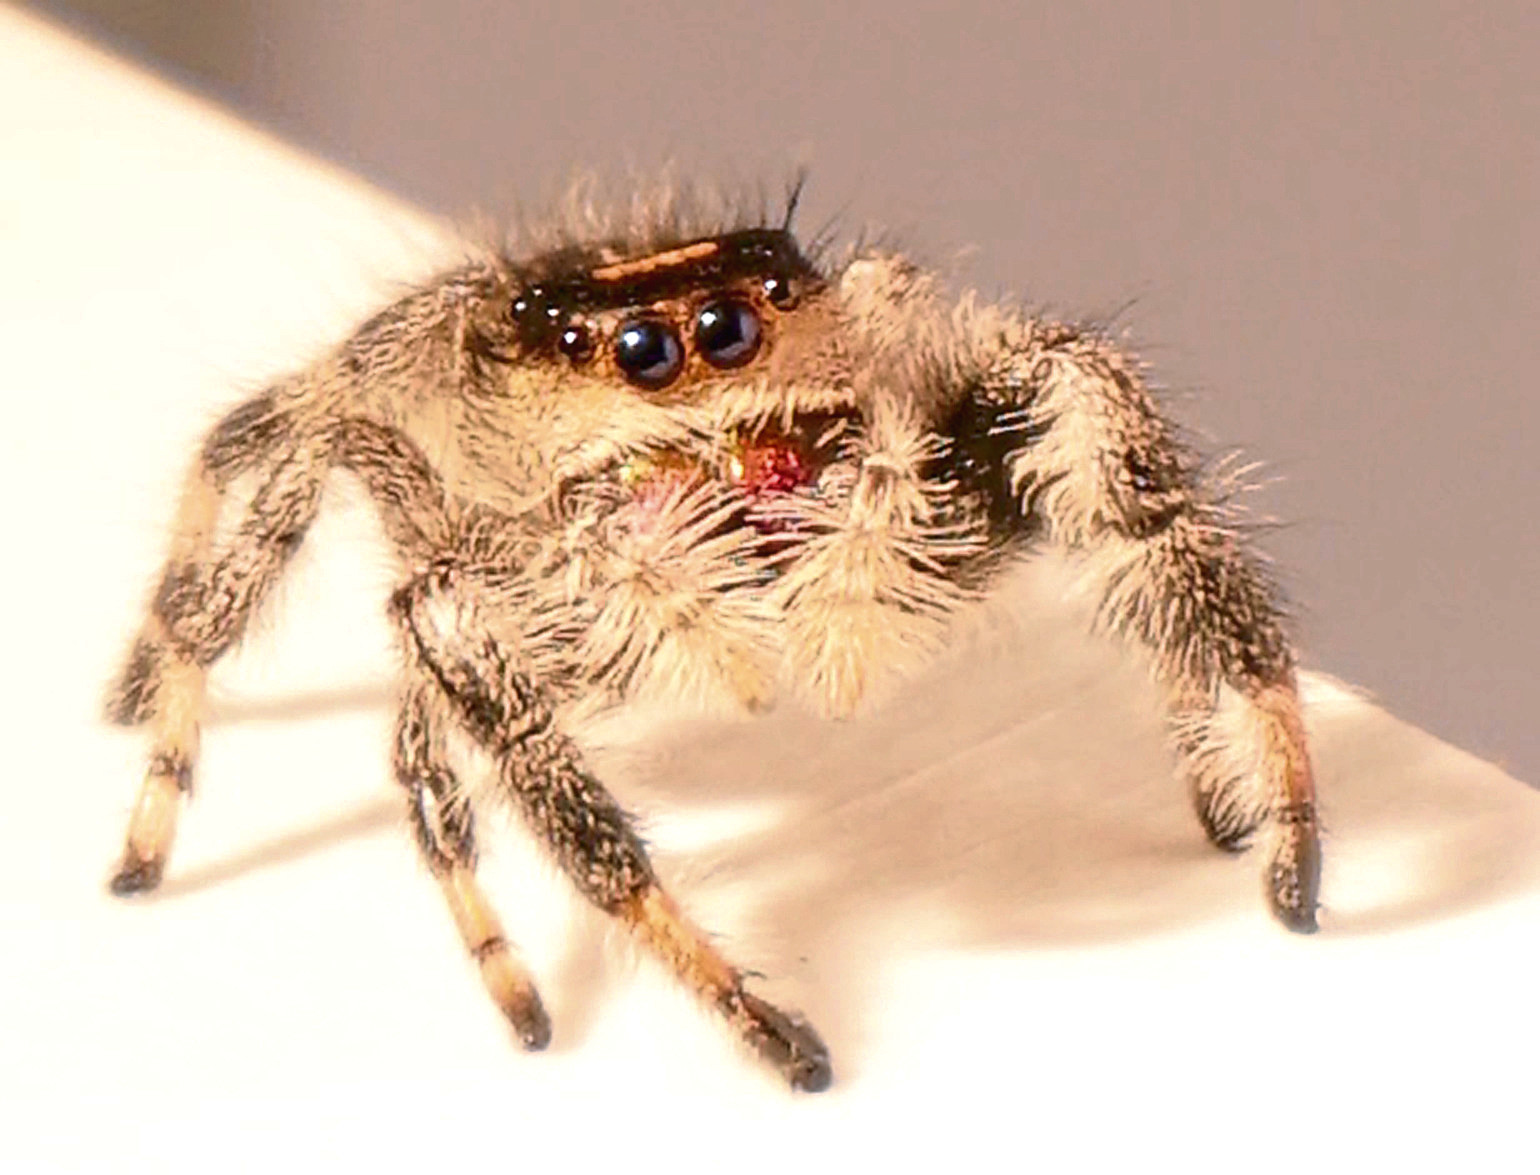 The study, conducted by researchers at *The University of Manchester, is the most advanced of its kind to date and first to use 3D CT scanning and high-speed, high-resolution cameras to record, monitor and analyse a spiders movement and behaviour.
pic from University of Manchester